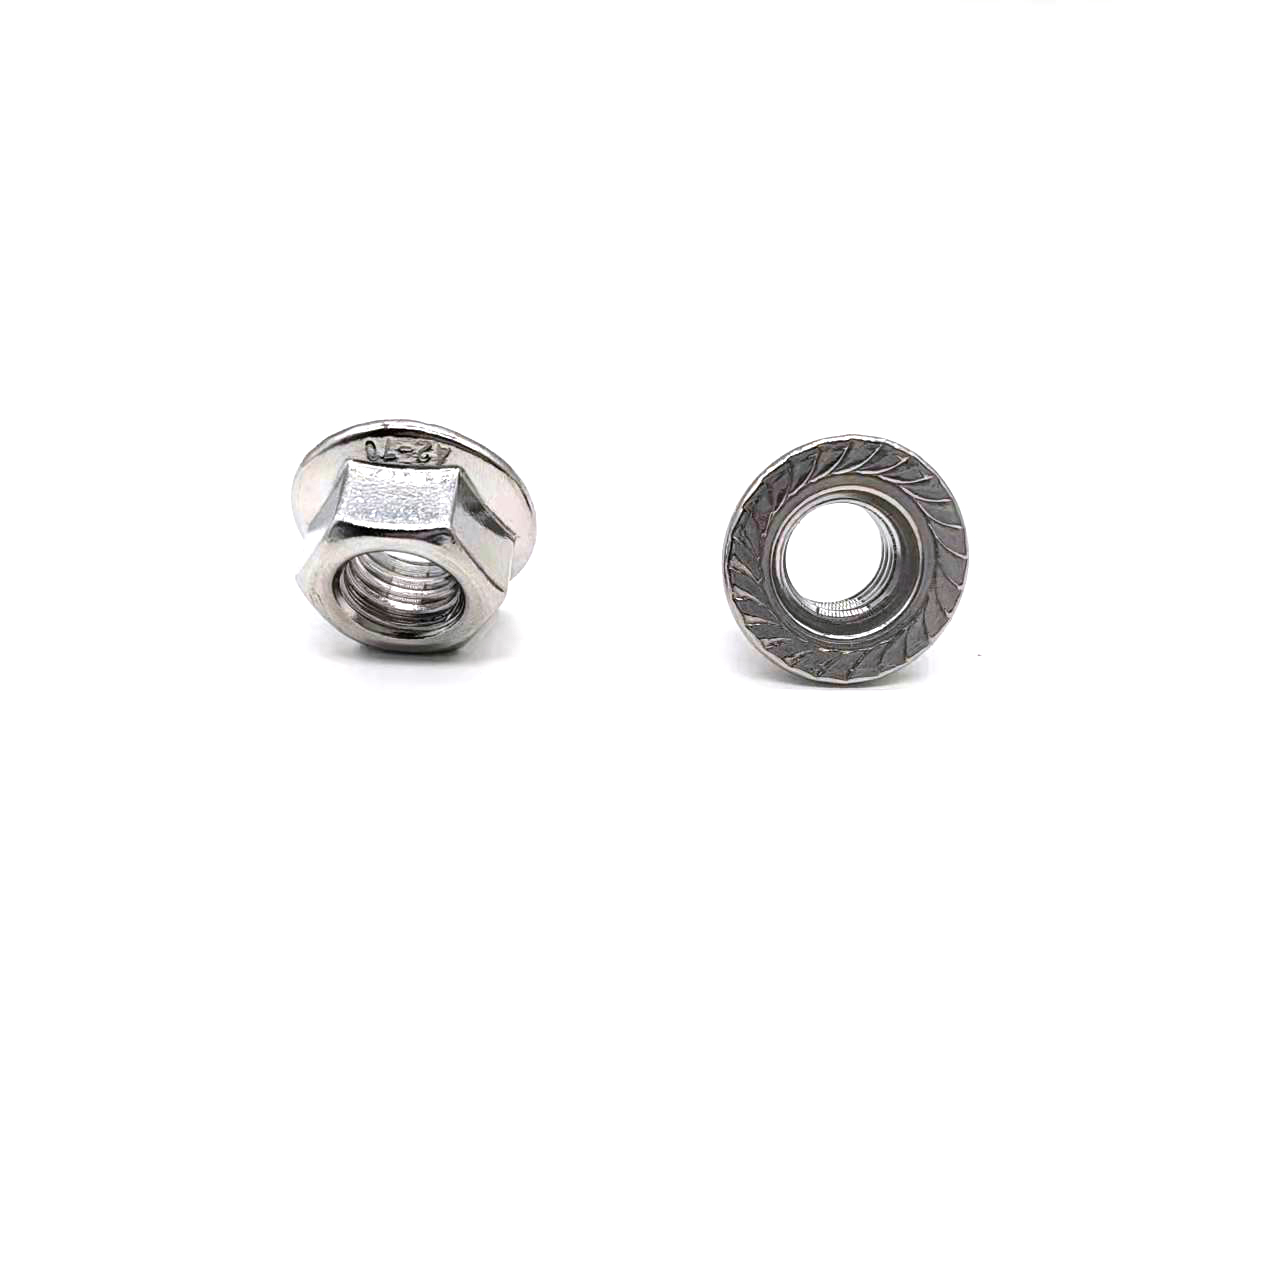  INOX A4 Stainless Steel INOX A2 M3 M4 M5 Hex Flange Nut 